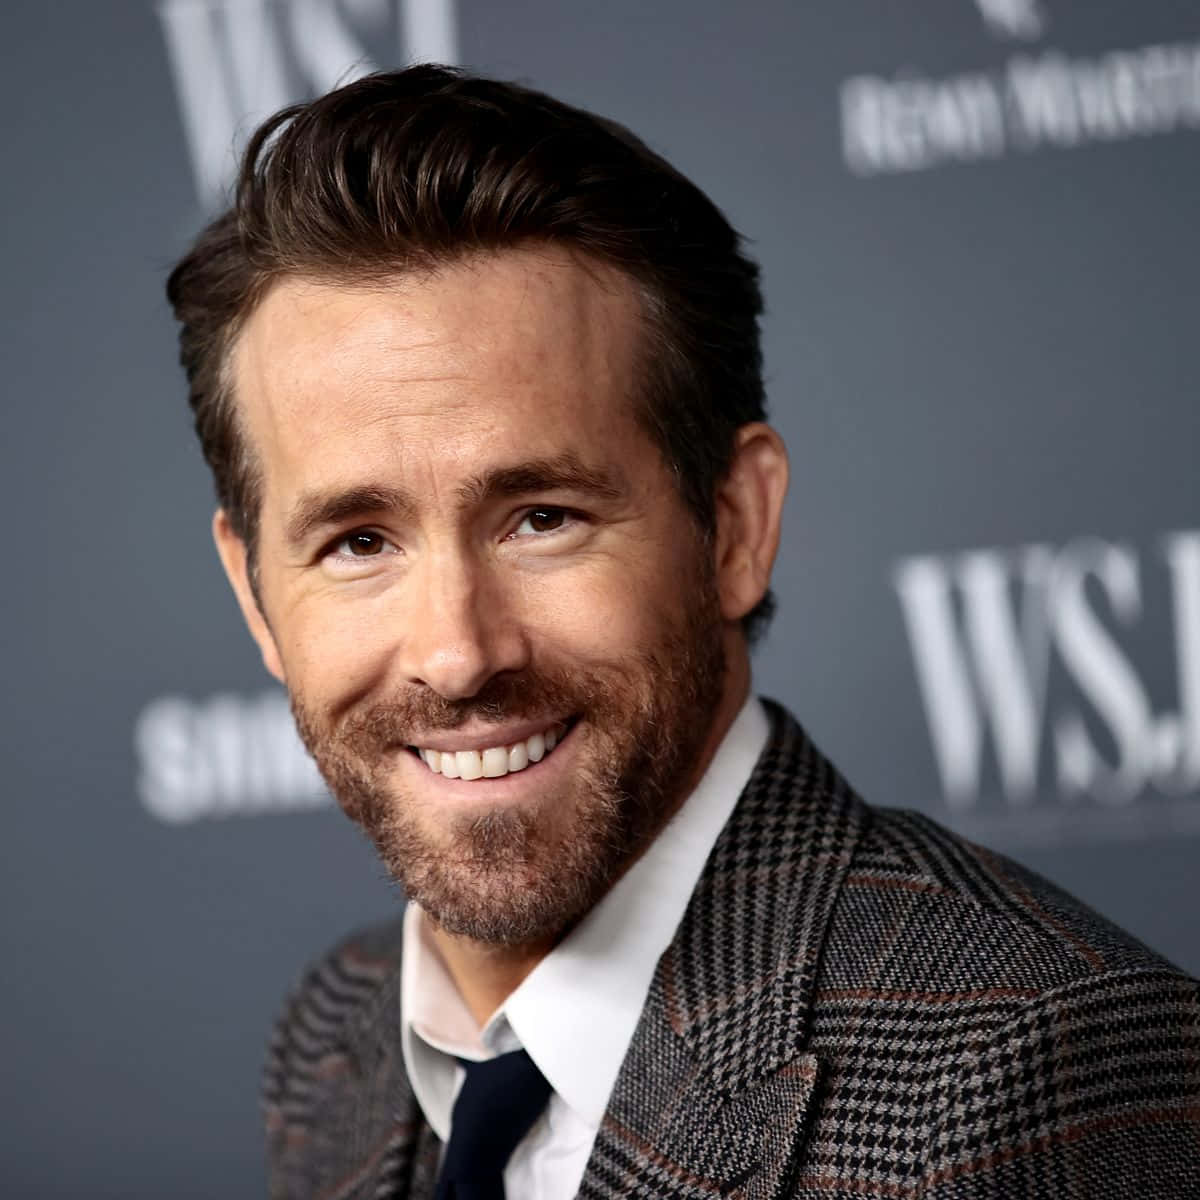 Ryan Reynolds Is Smiling At The Wsl Event